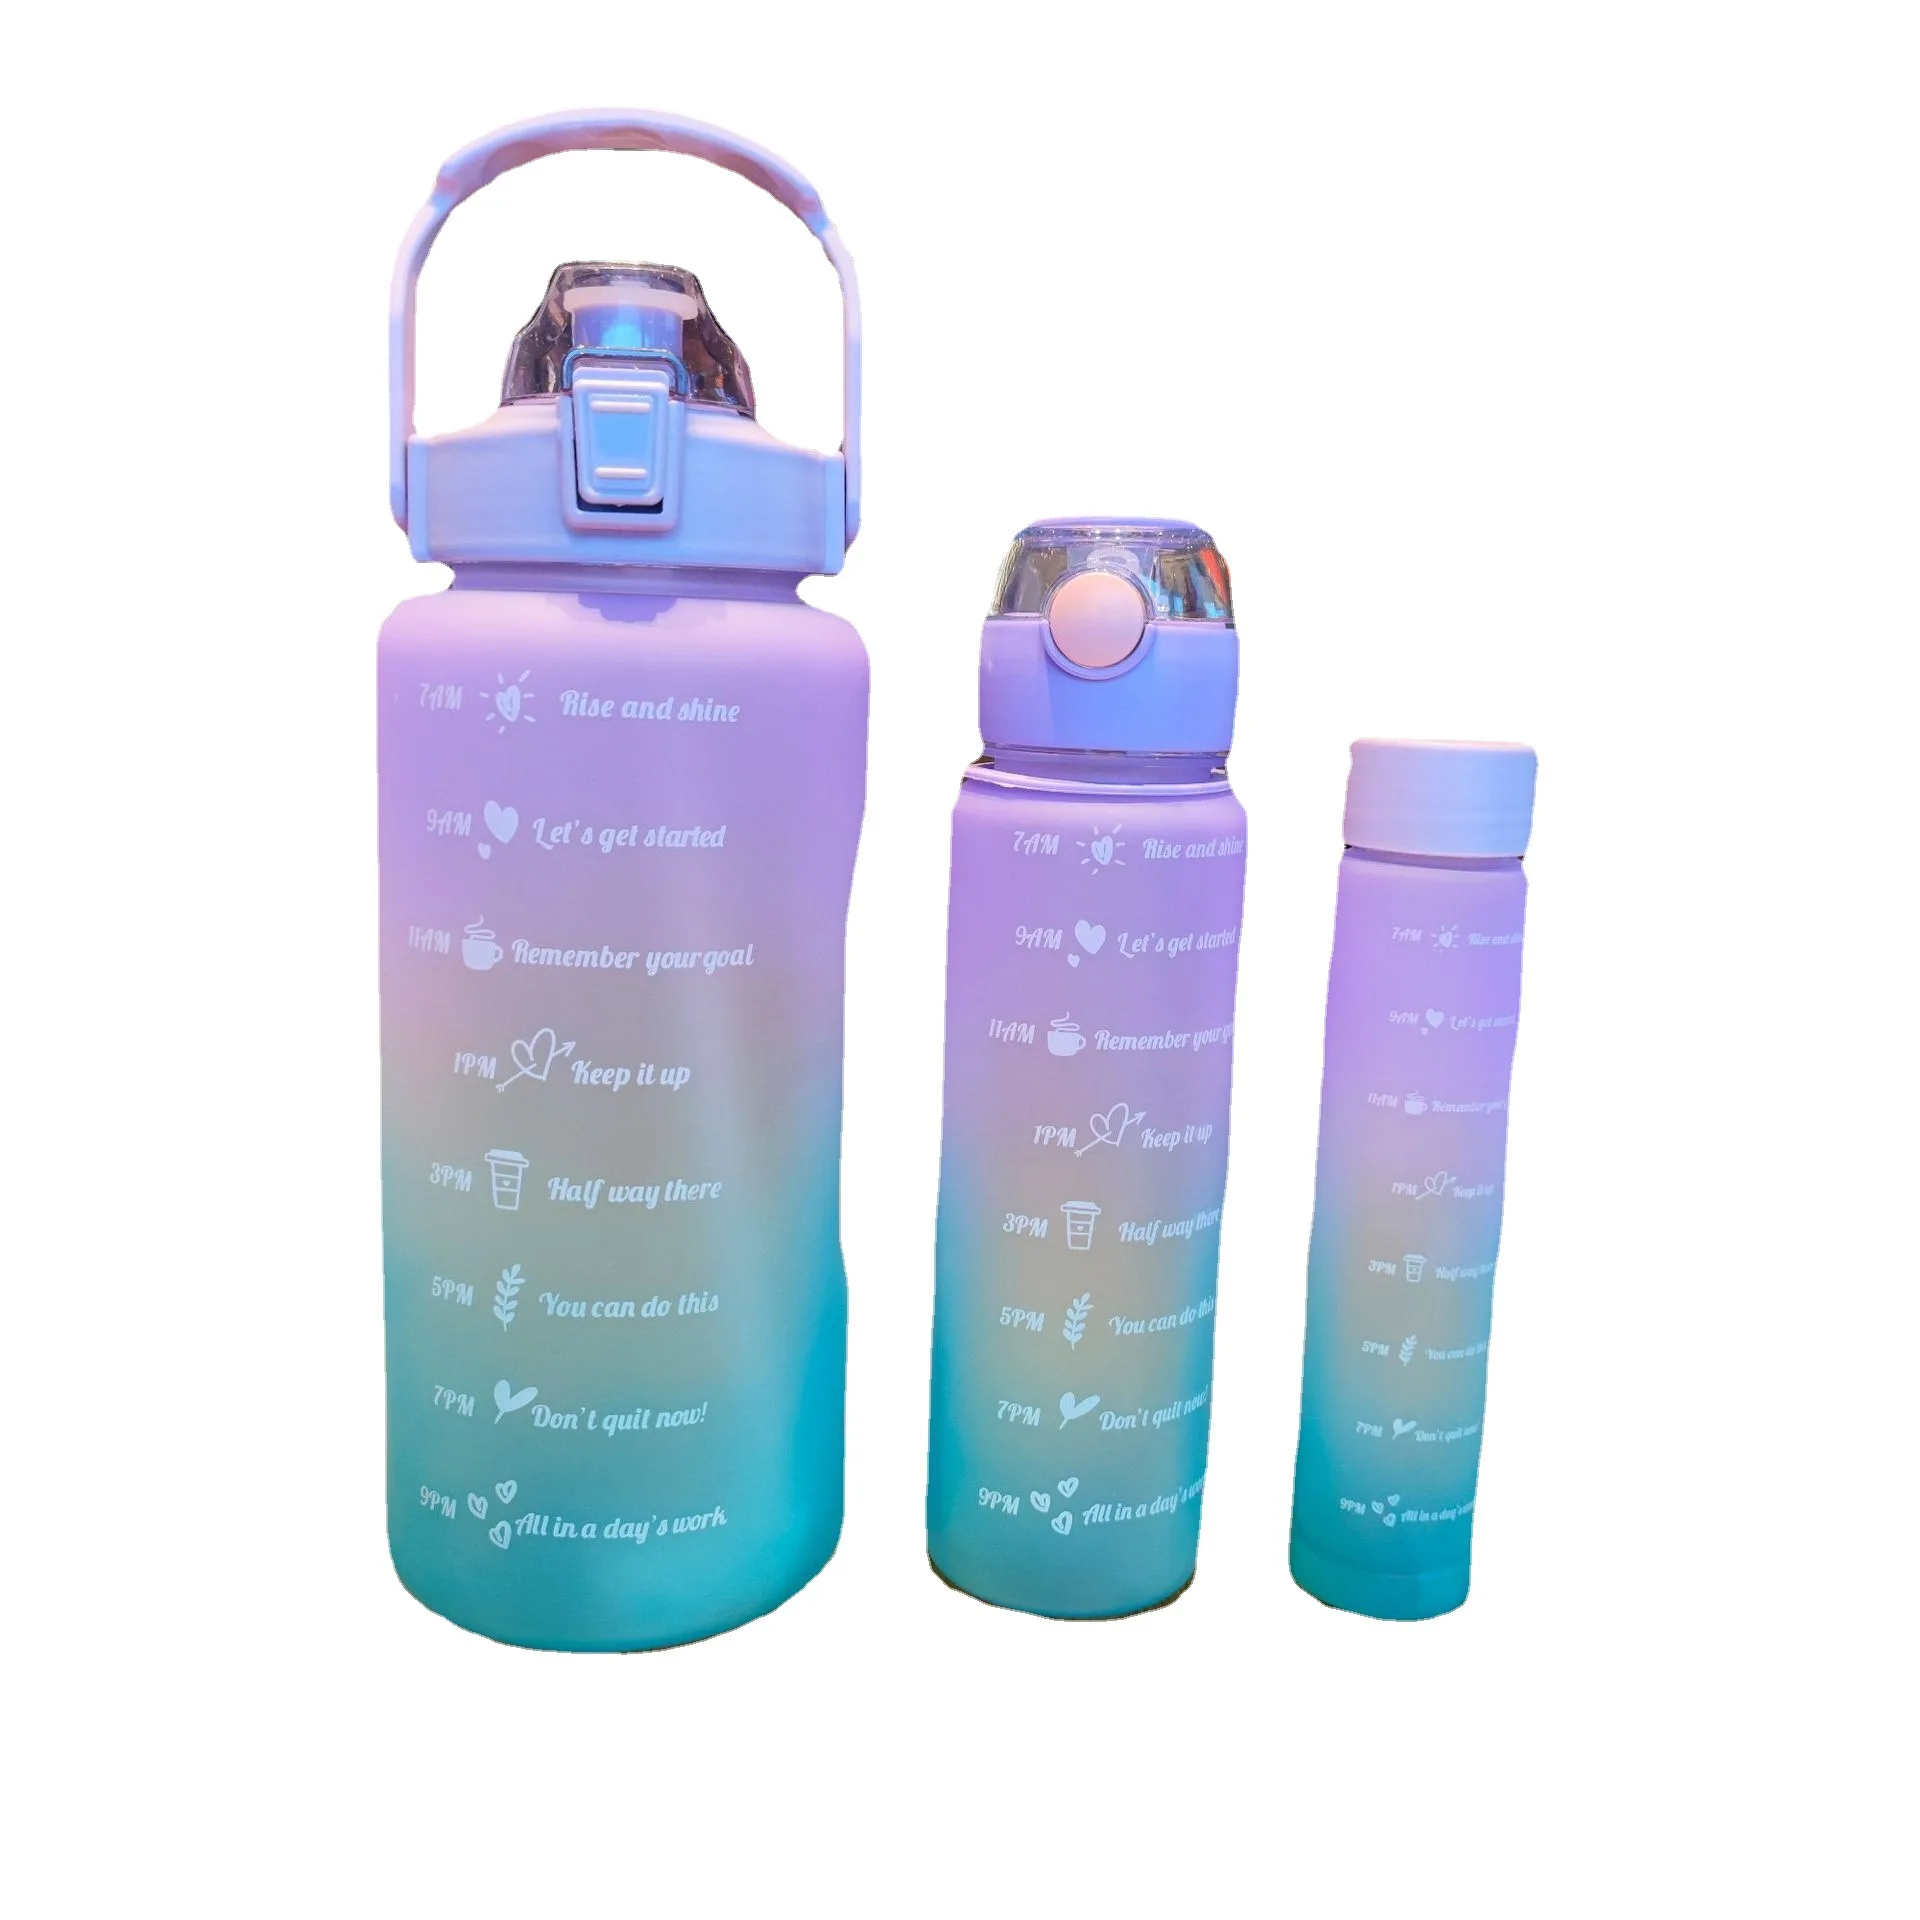 https://ae01.alicdn.com/kf/Sb07929c08db64be5ae460e7cc2346eae1/3pcs-Set-Sports-Water-Bottle-Portable-Gradient-Color-Drinking-Water-Straw-Cup-Drinkware-Outdoor-Travel-Gym.jpg